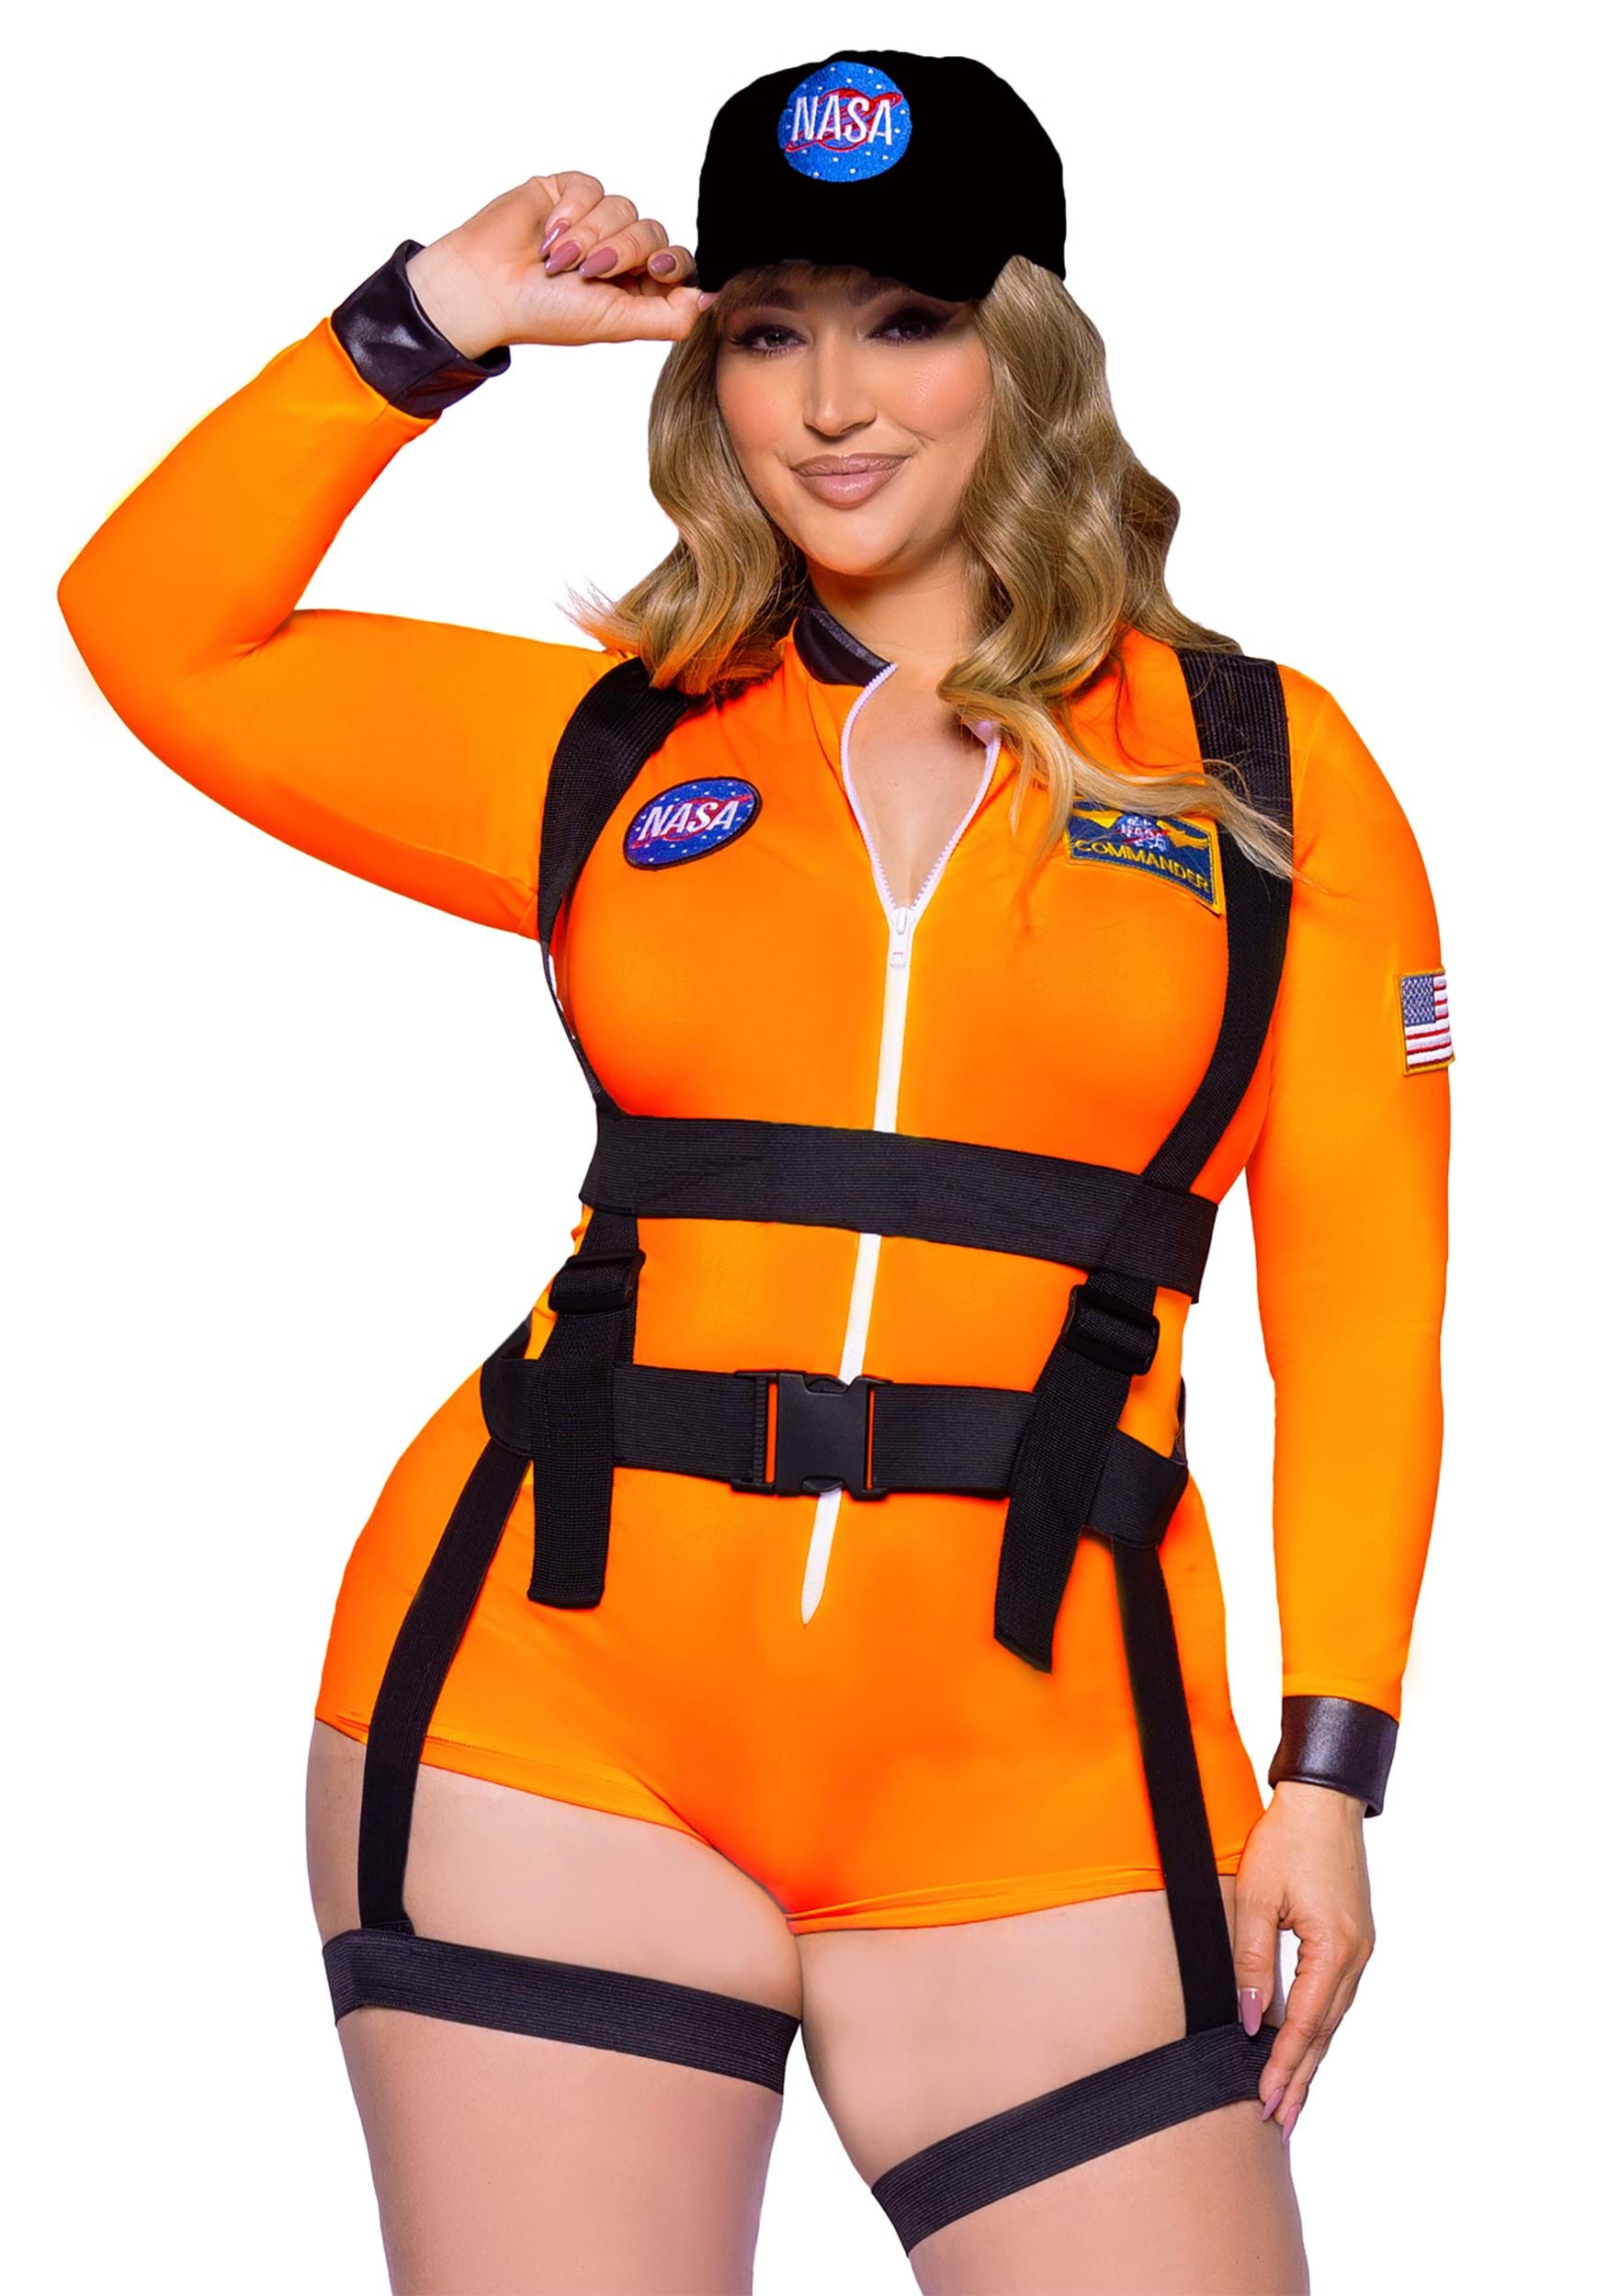 Women's Sexy Size Space Command Costume